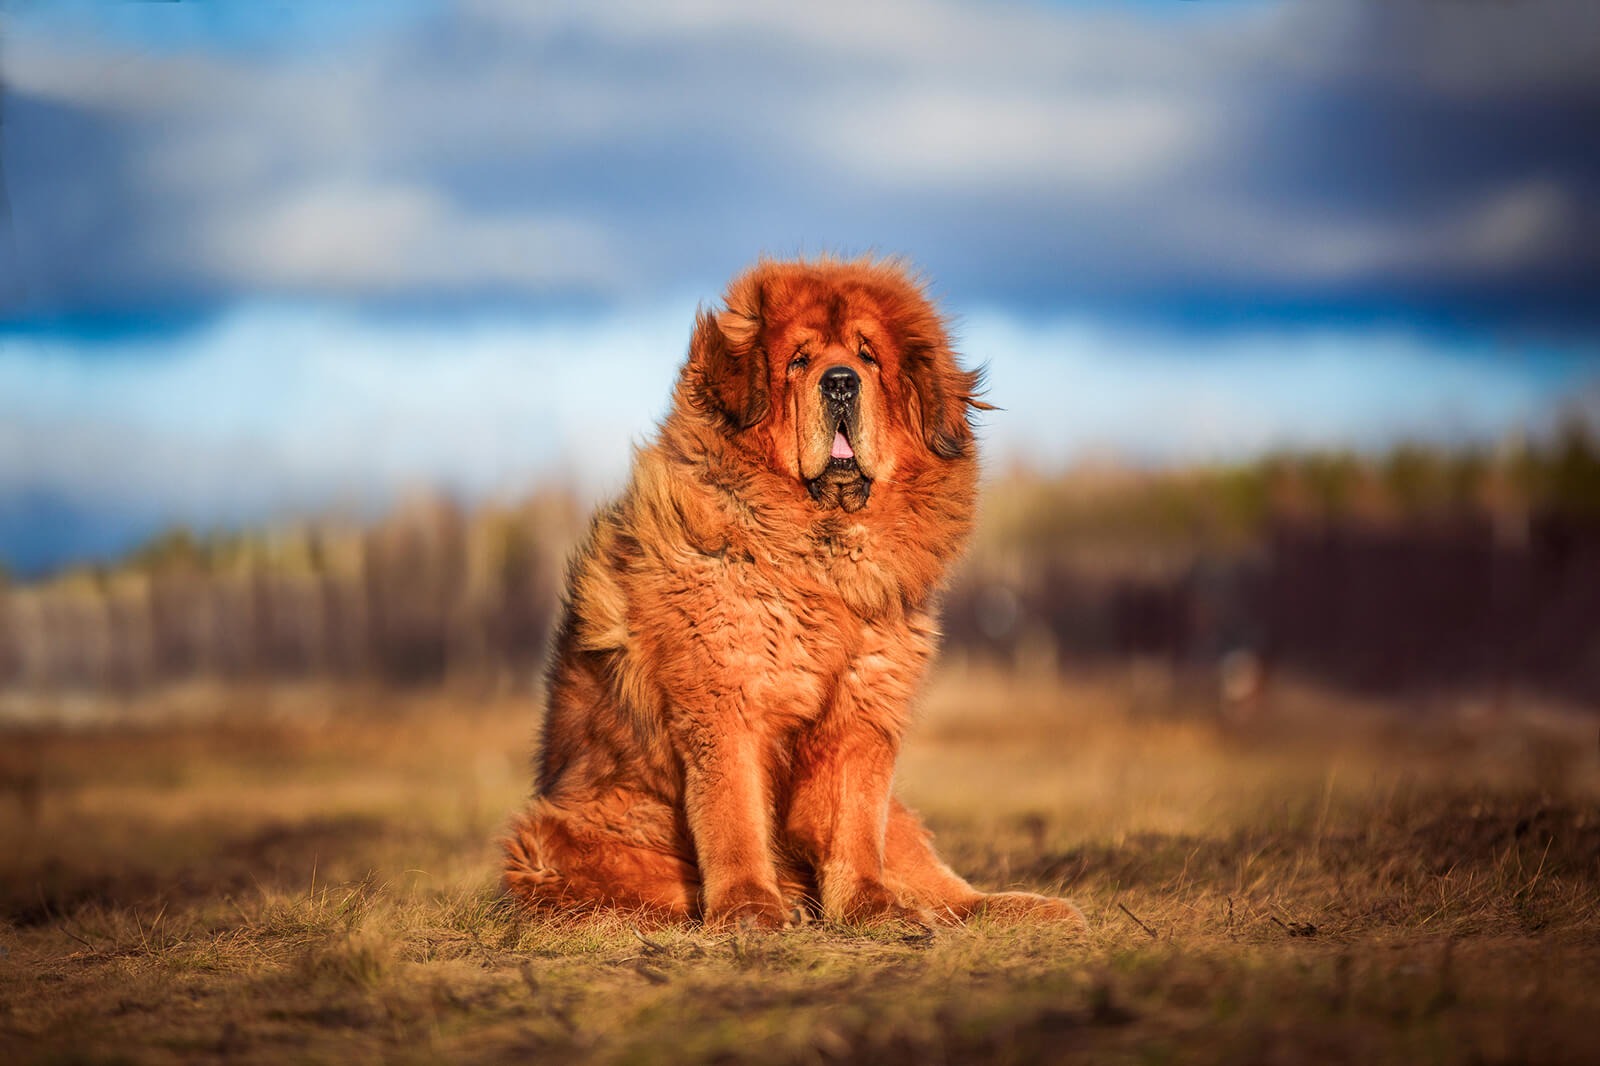 Can You Pass This Geography Quiz Where Every Question Comes With a 🐶 Dog-Related Clue? Tibetan Mastiff